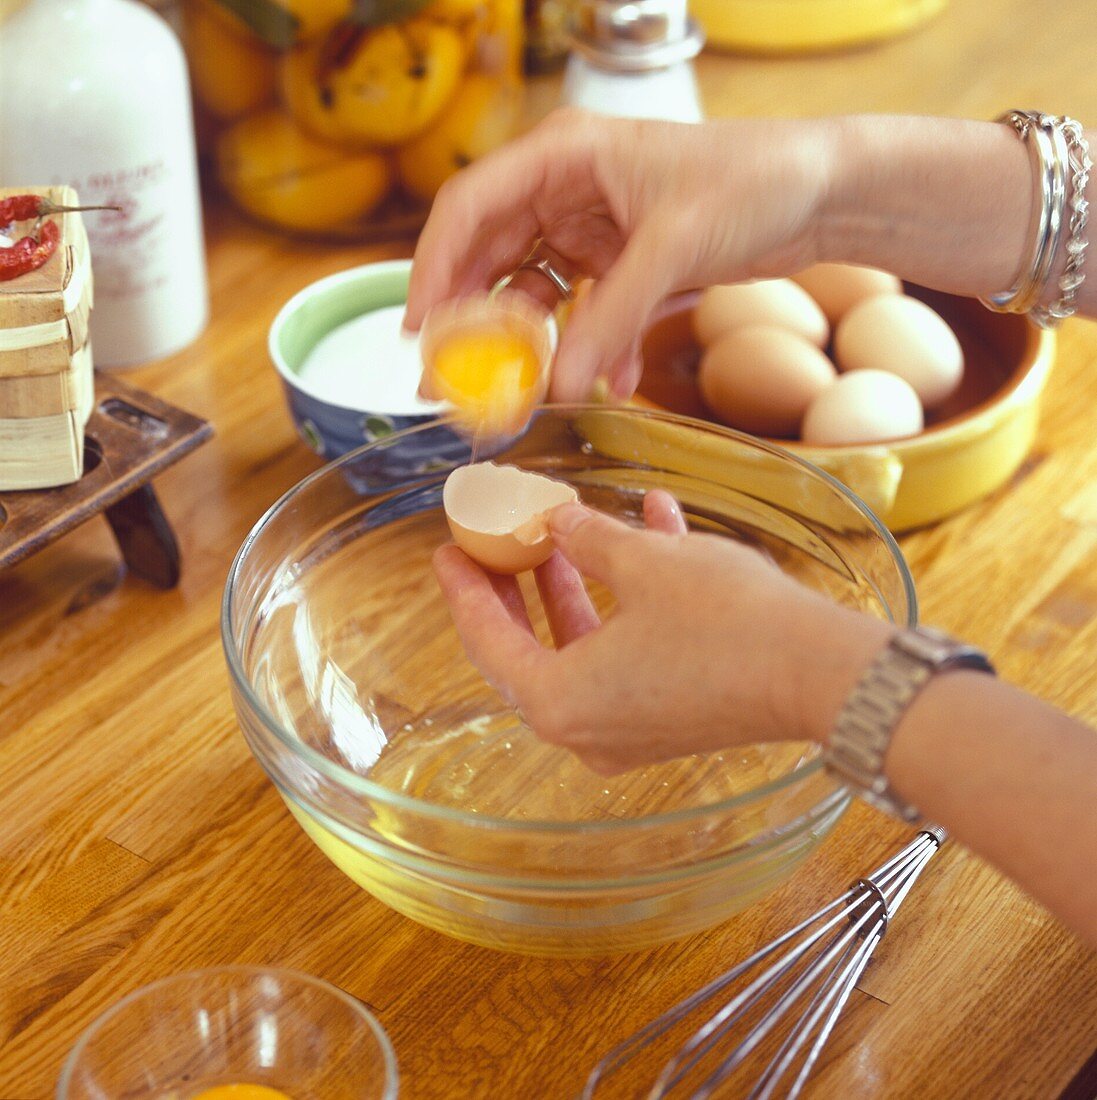 Separating eggs over a dish